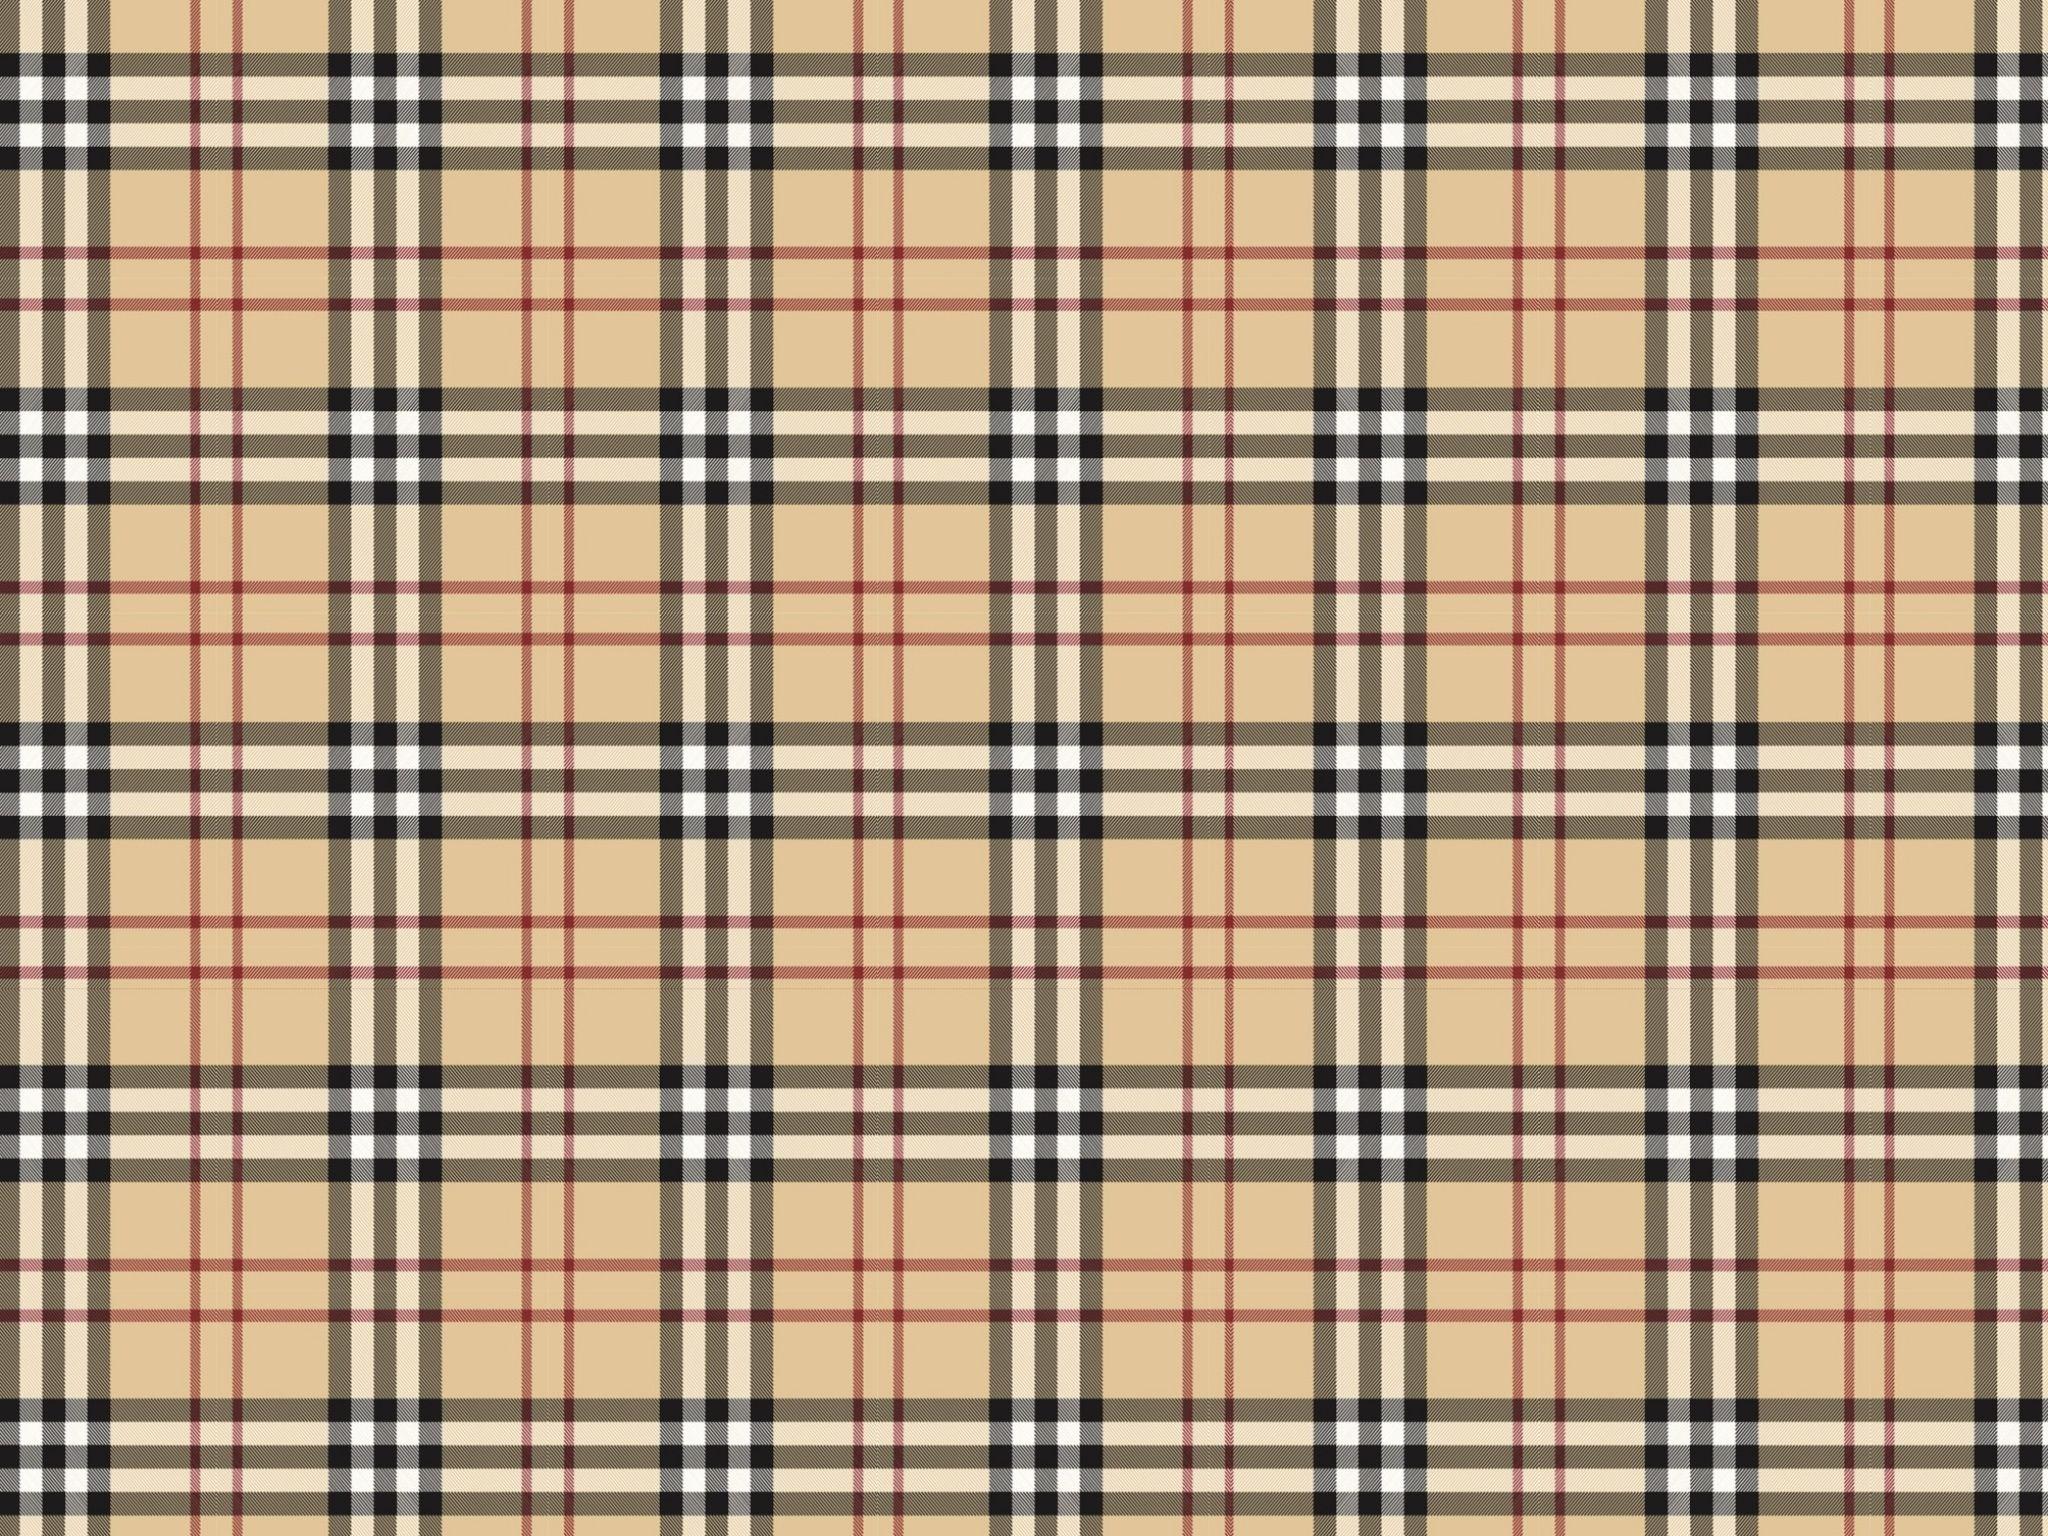 Burberry Pattern - Free Burberry Pattern Backgrounds -